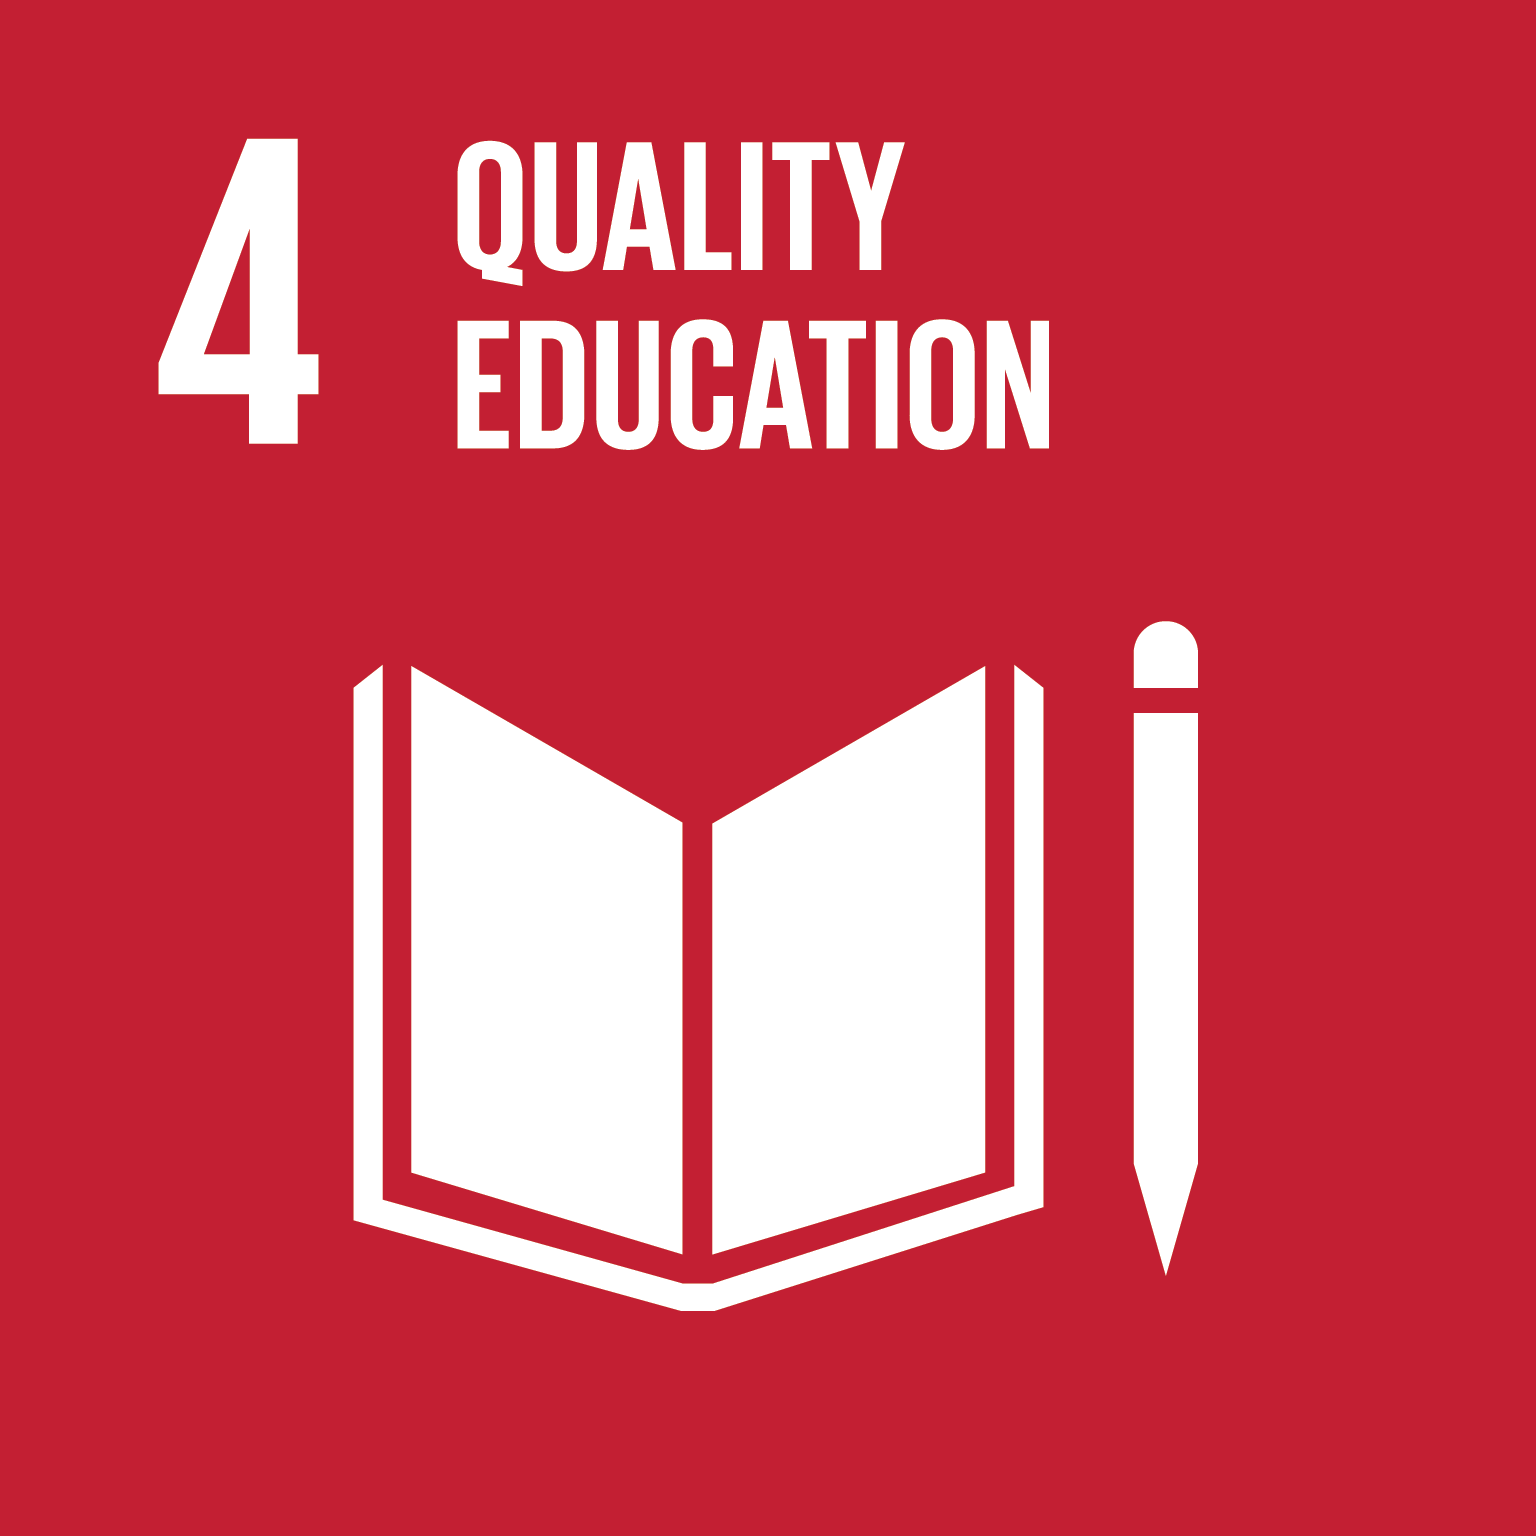 Ensure inclusive and quality education for all and promote lifelong learning